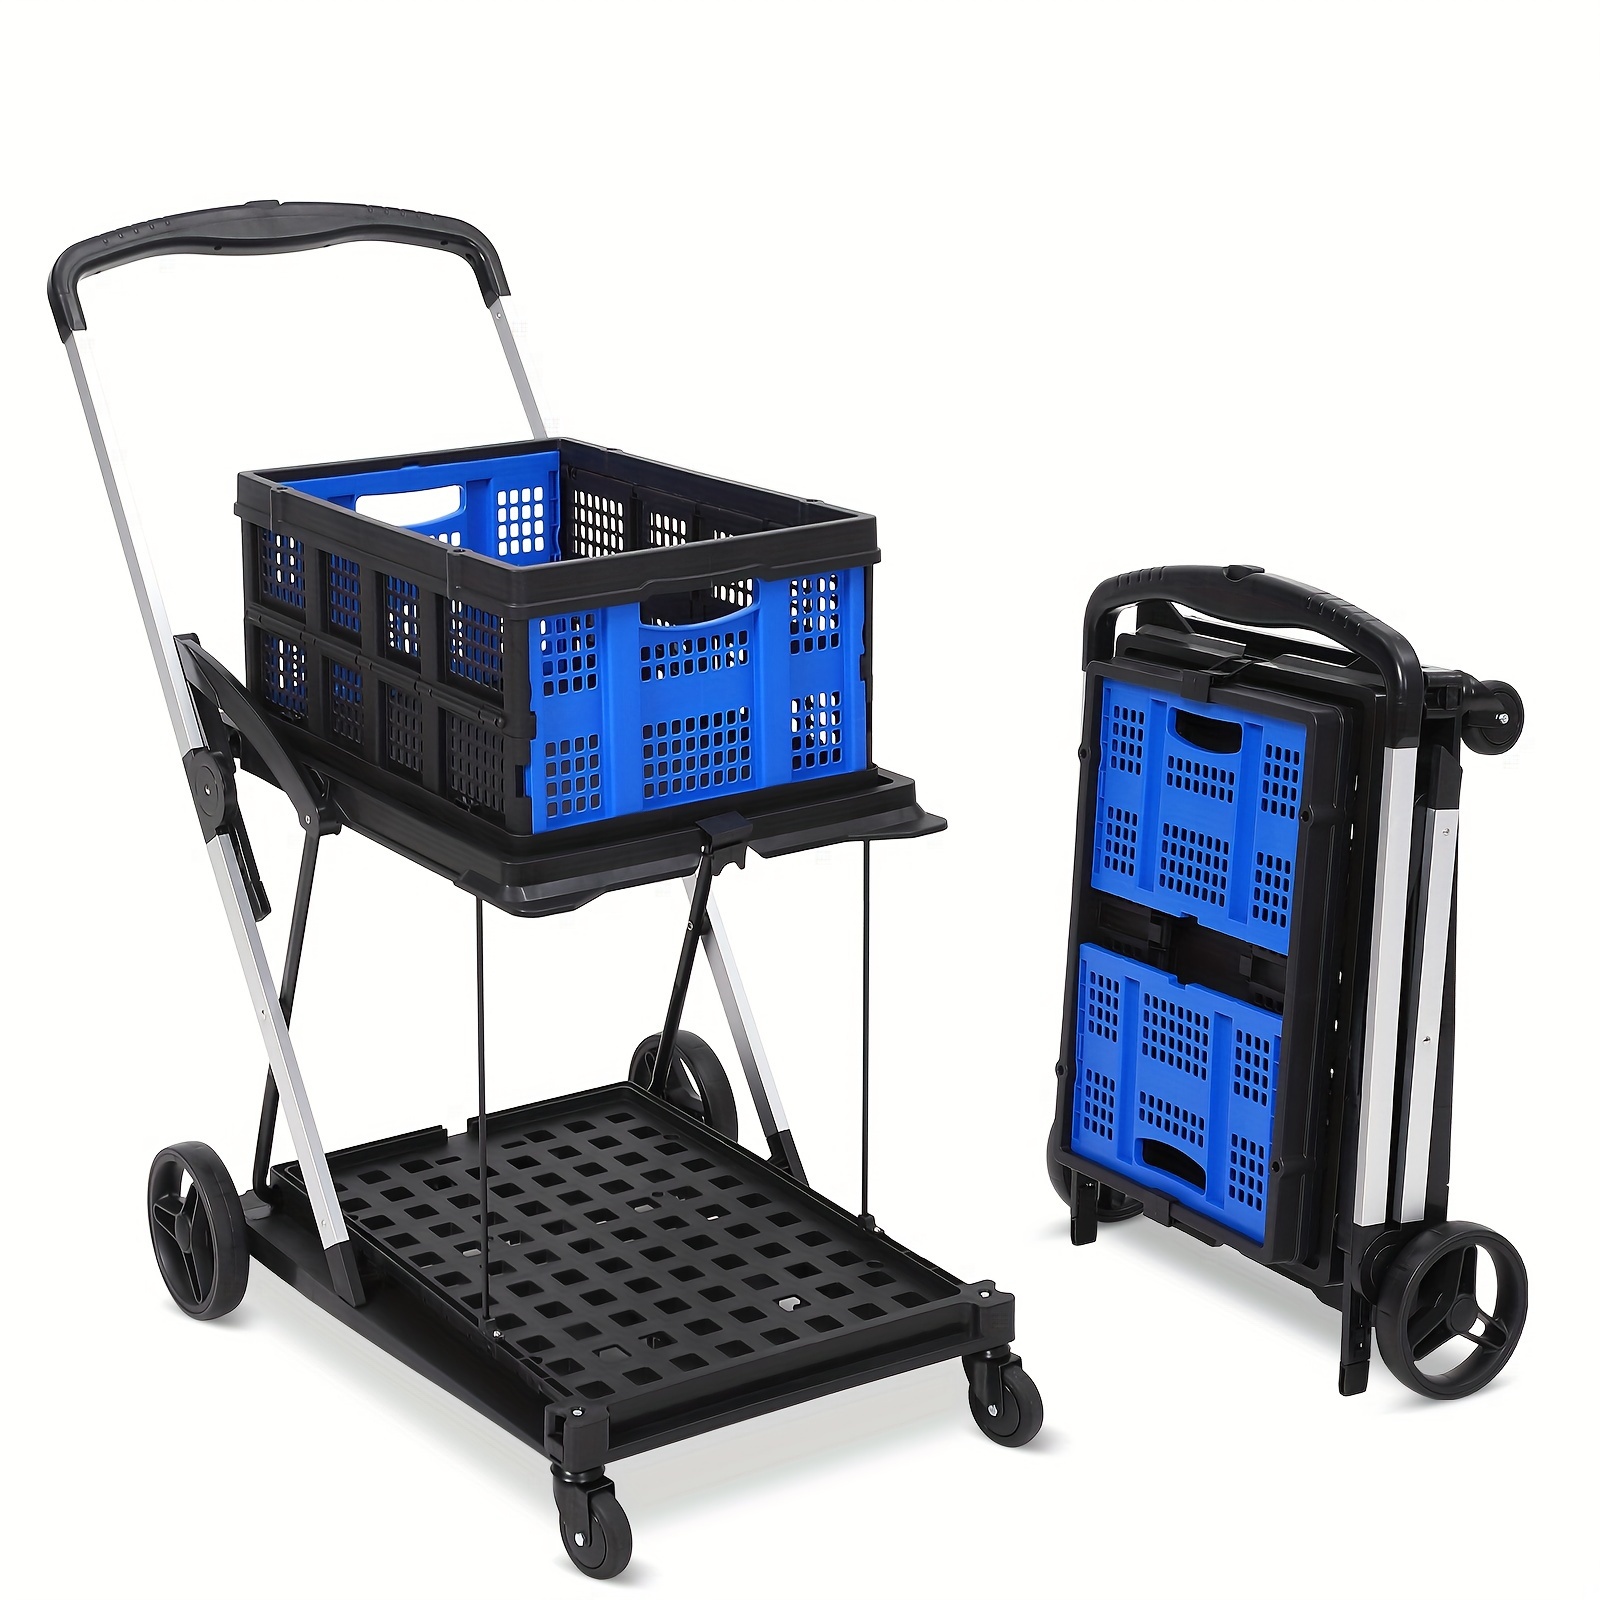 

1pc Foldable Trolley, Multi-purpose Mobile Trolley, Shopping Cart & Storage Bin, Platform Truck That Can Withstand 200 Lbs For Home Improvement, Kitchen